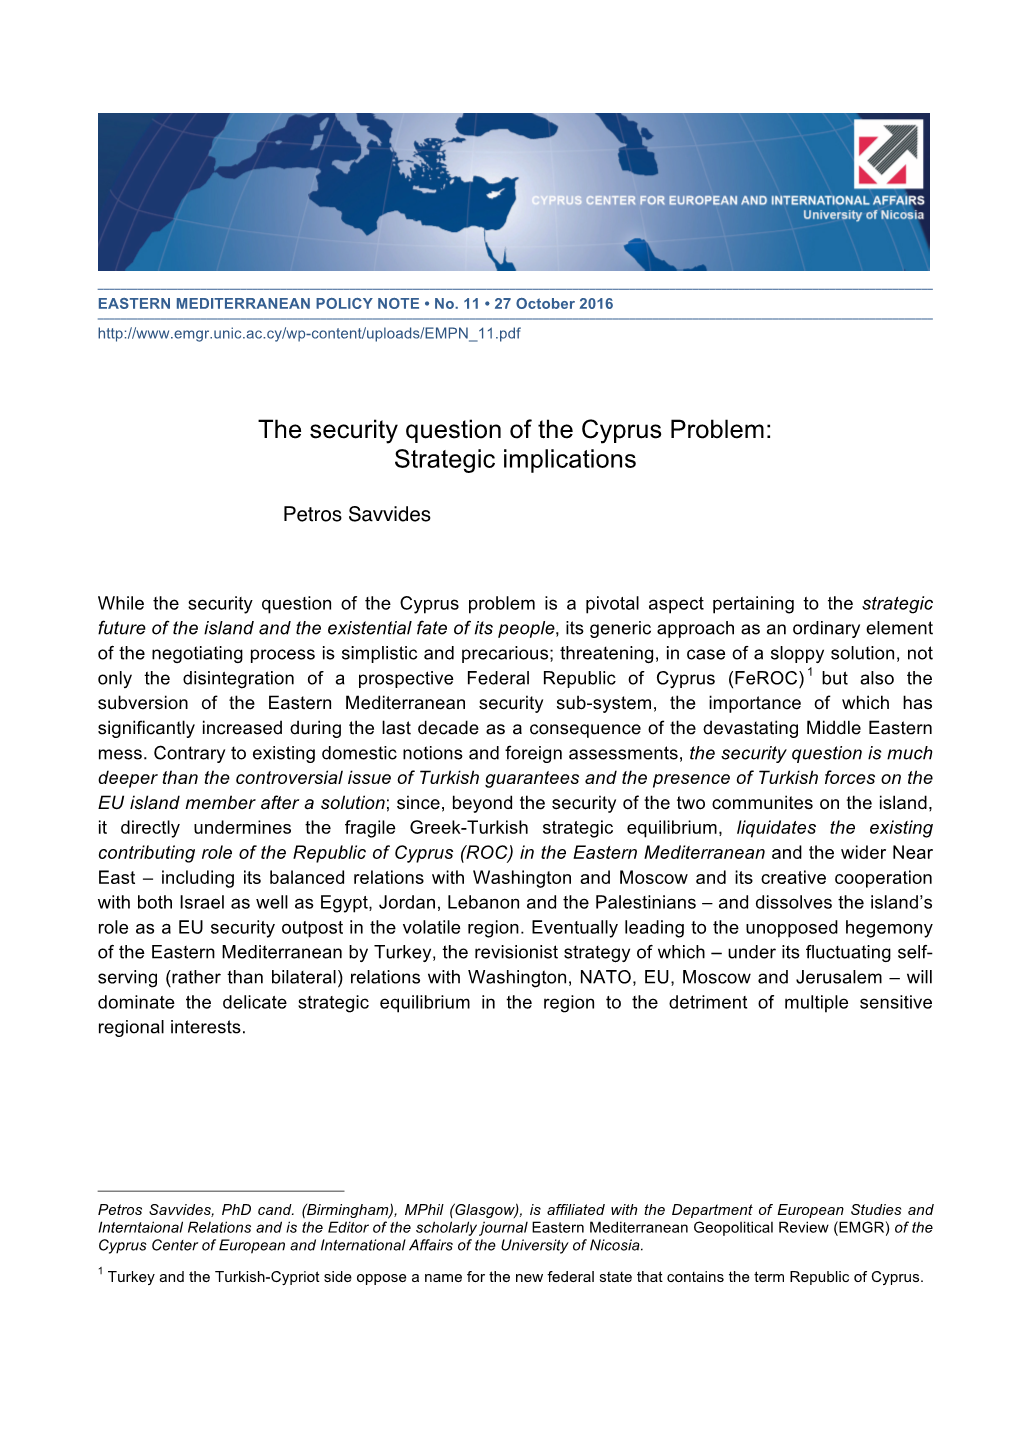 The Security Question of the Cyprus Problem: Strategic Implications